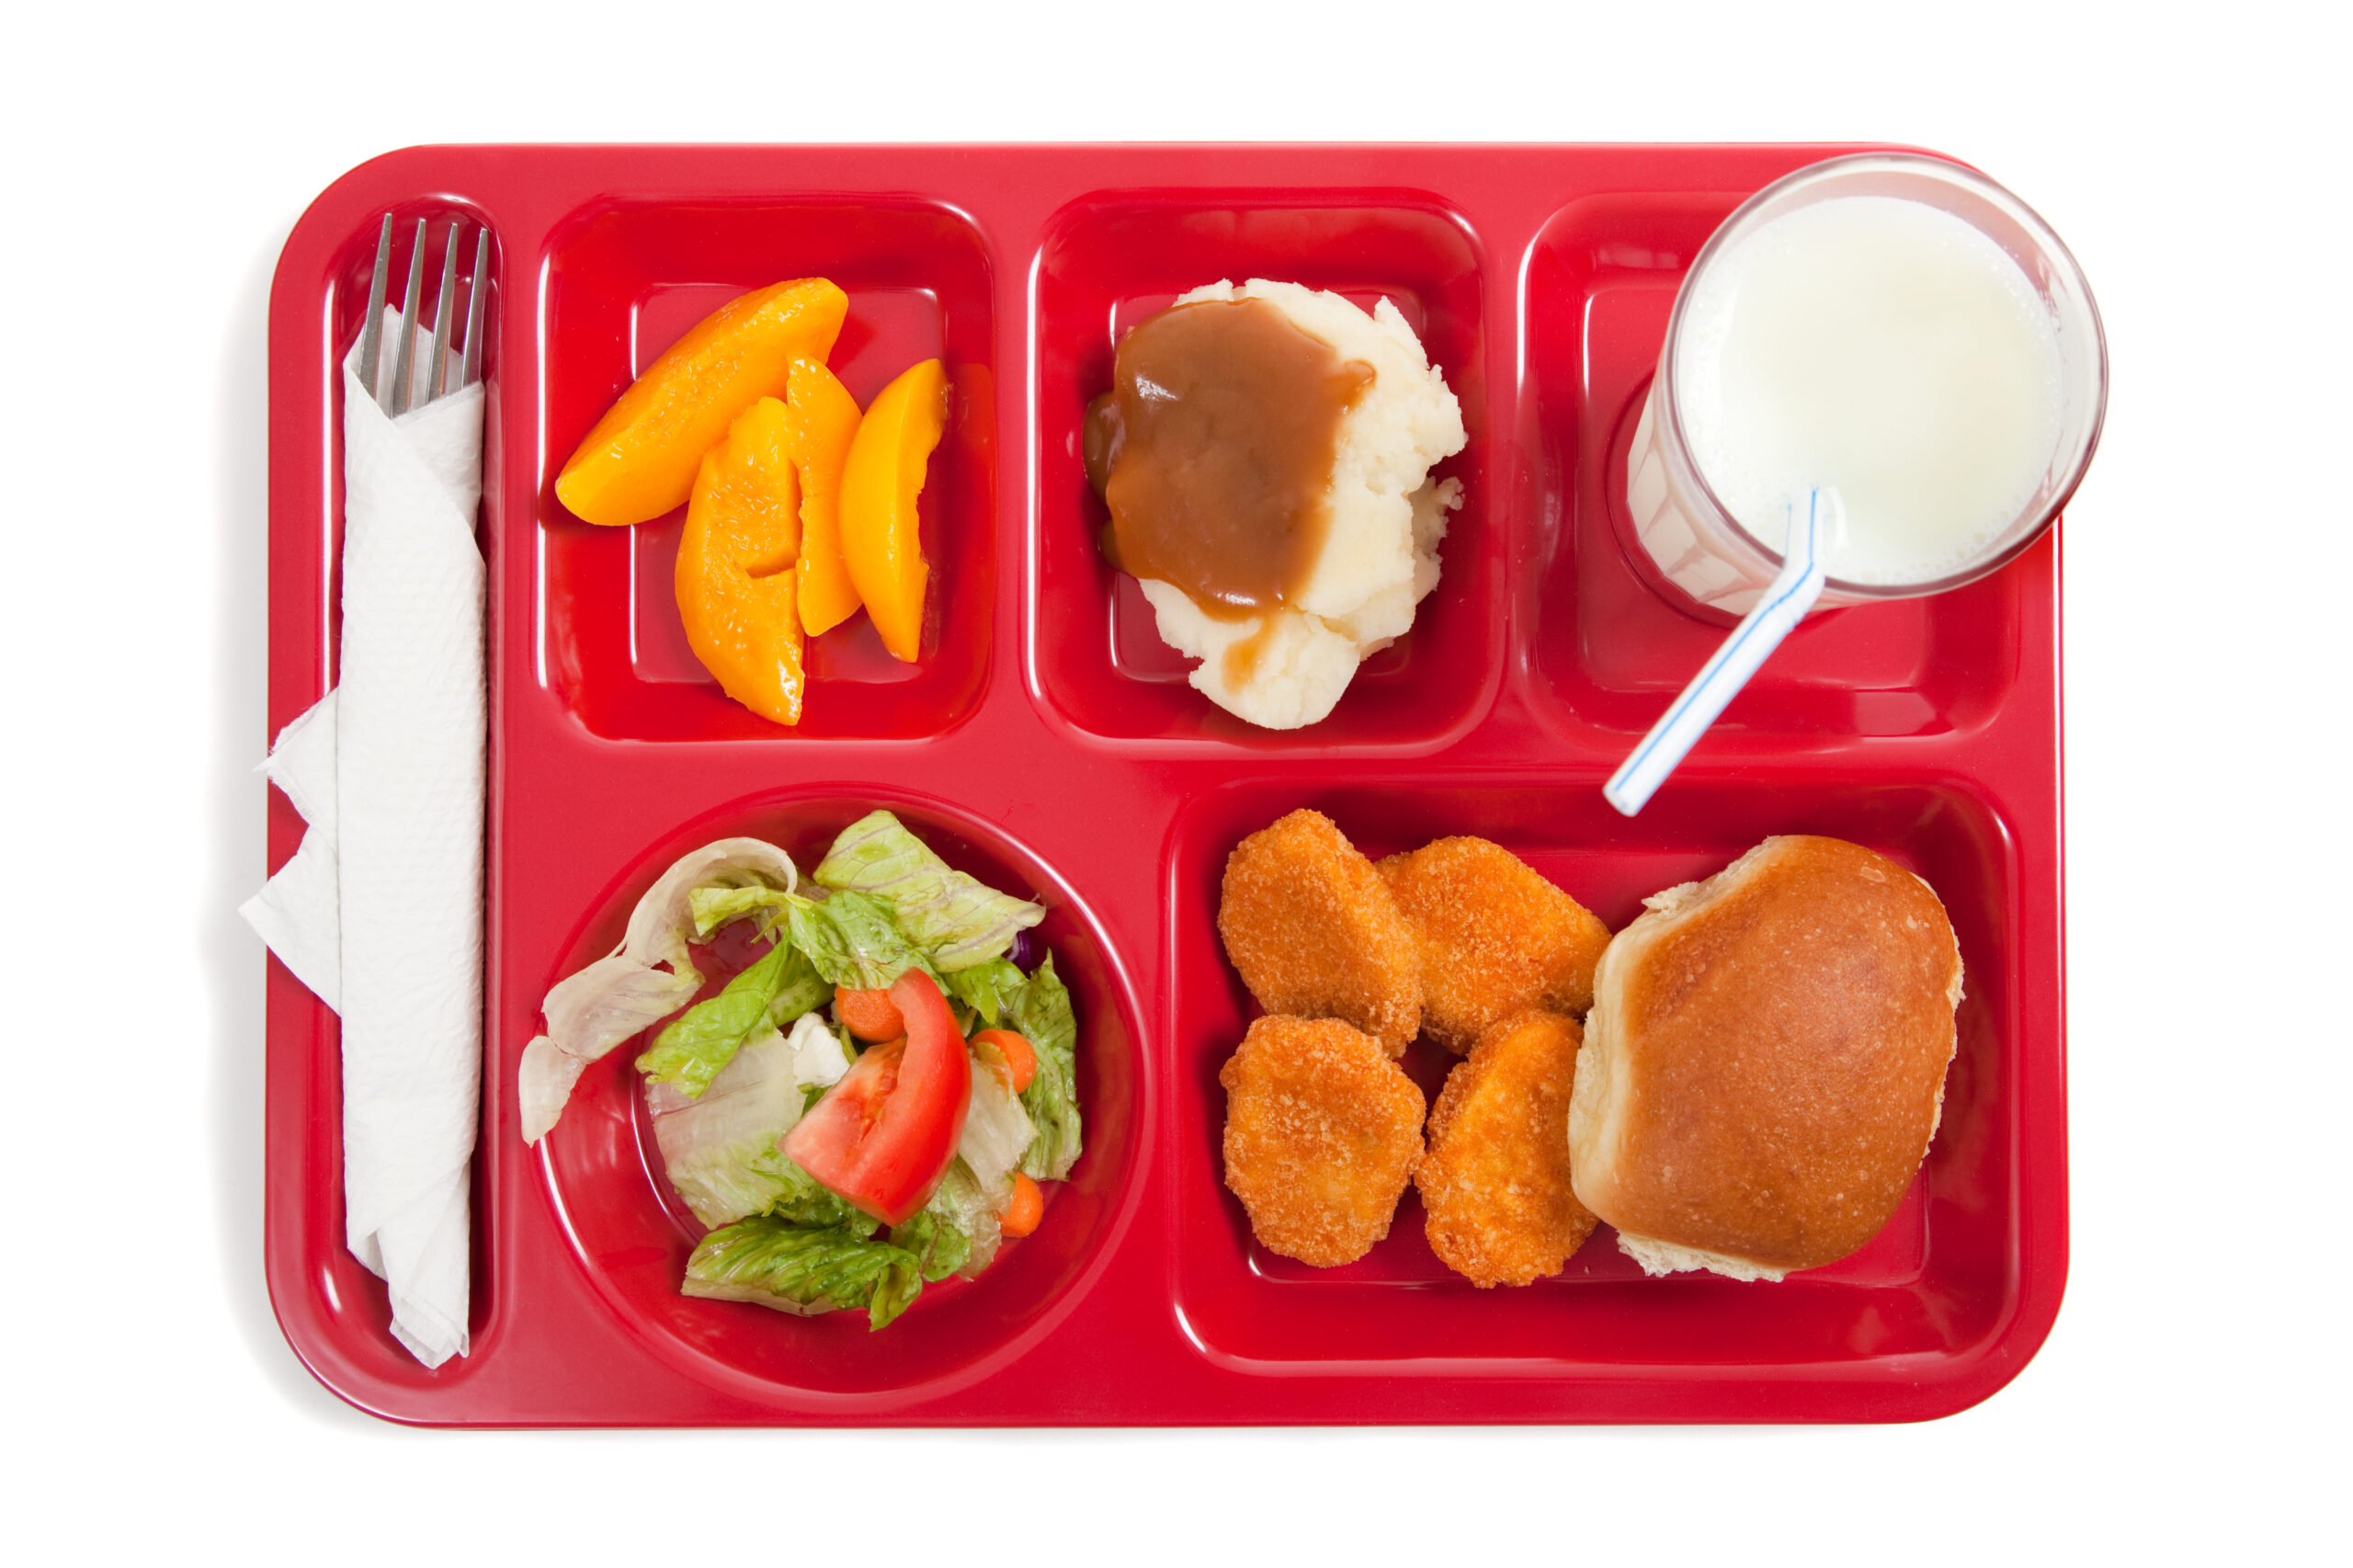 A red school lunch tray viewed from above. The tray contains a roll, chicken nuggets, salad, peaches, mashed potatoes and milk.